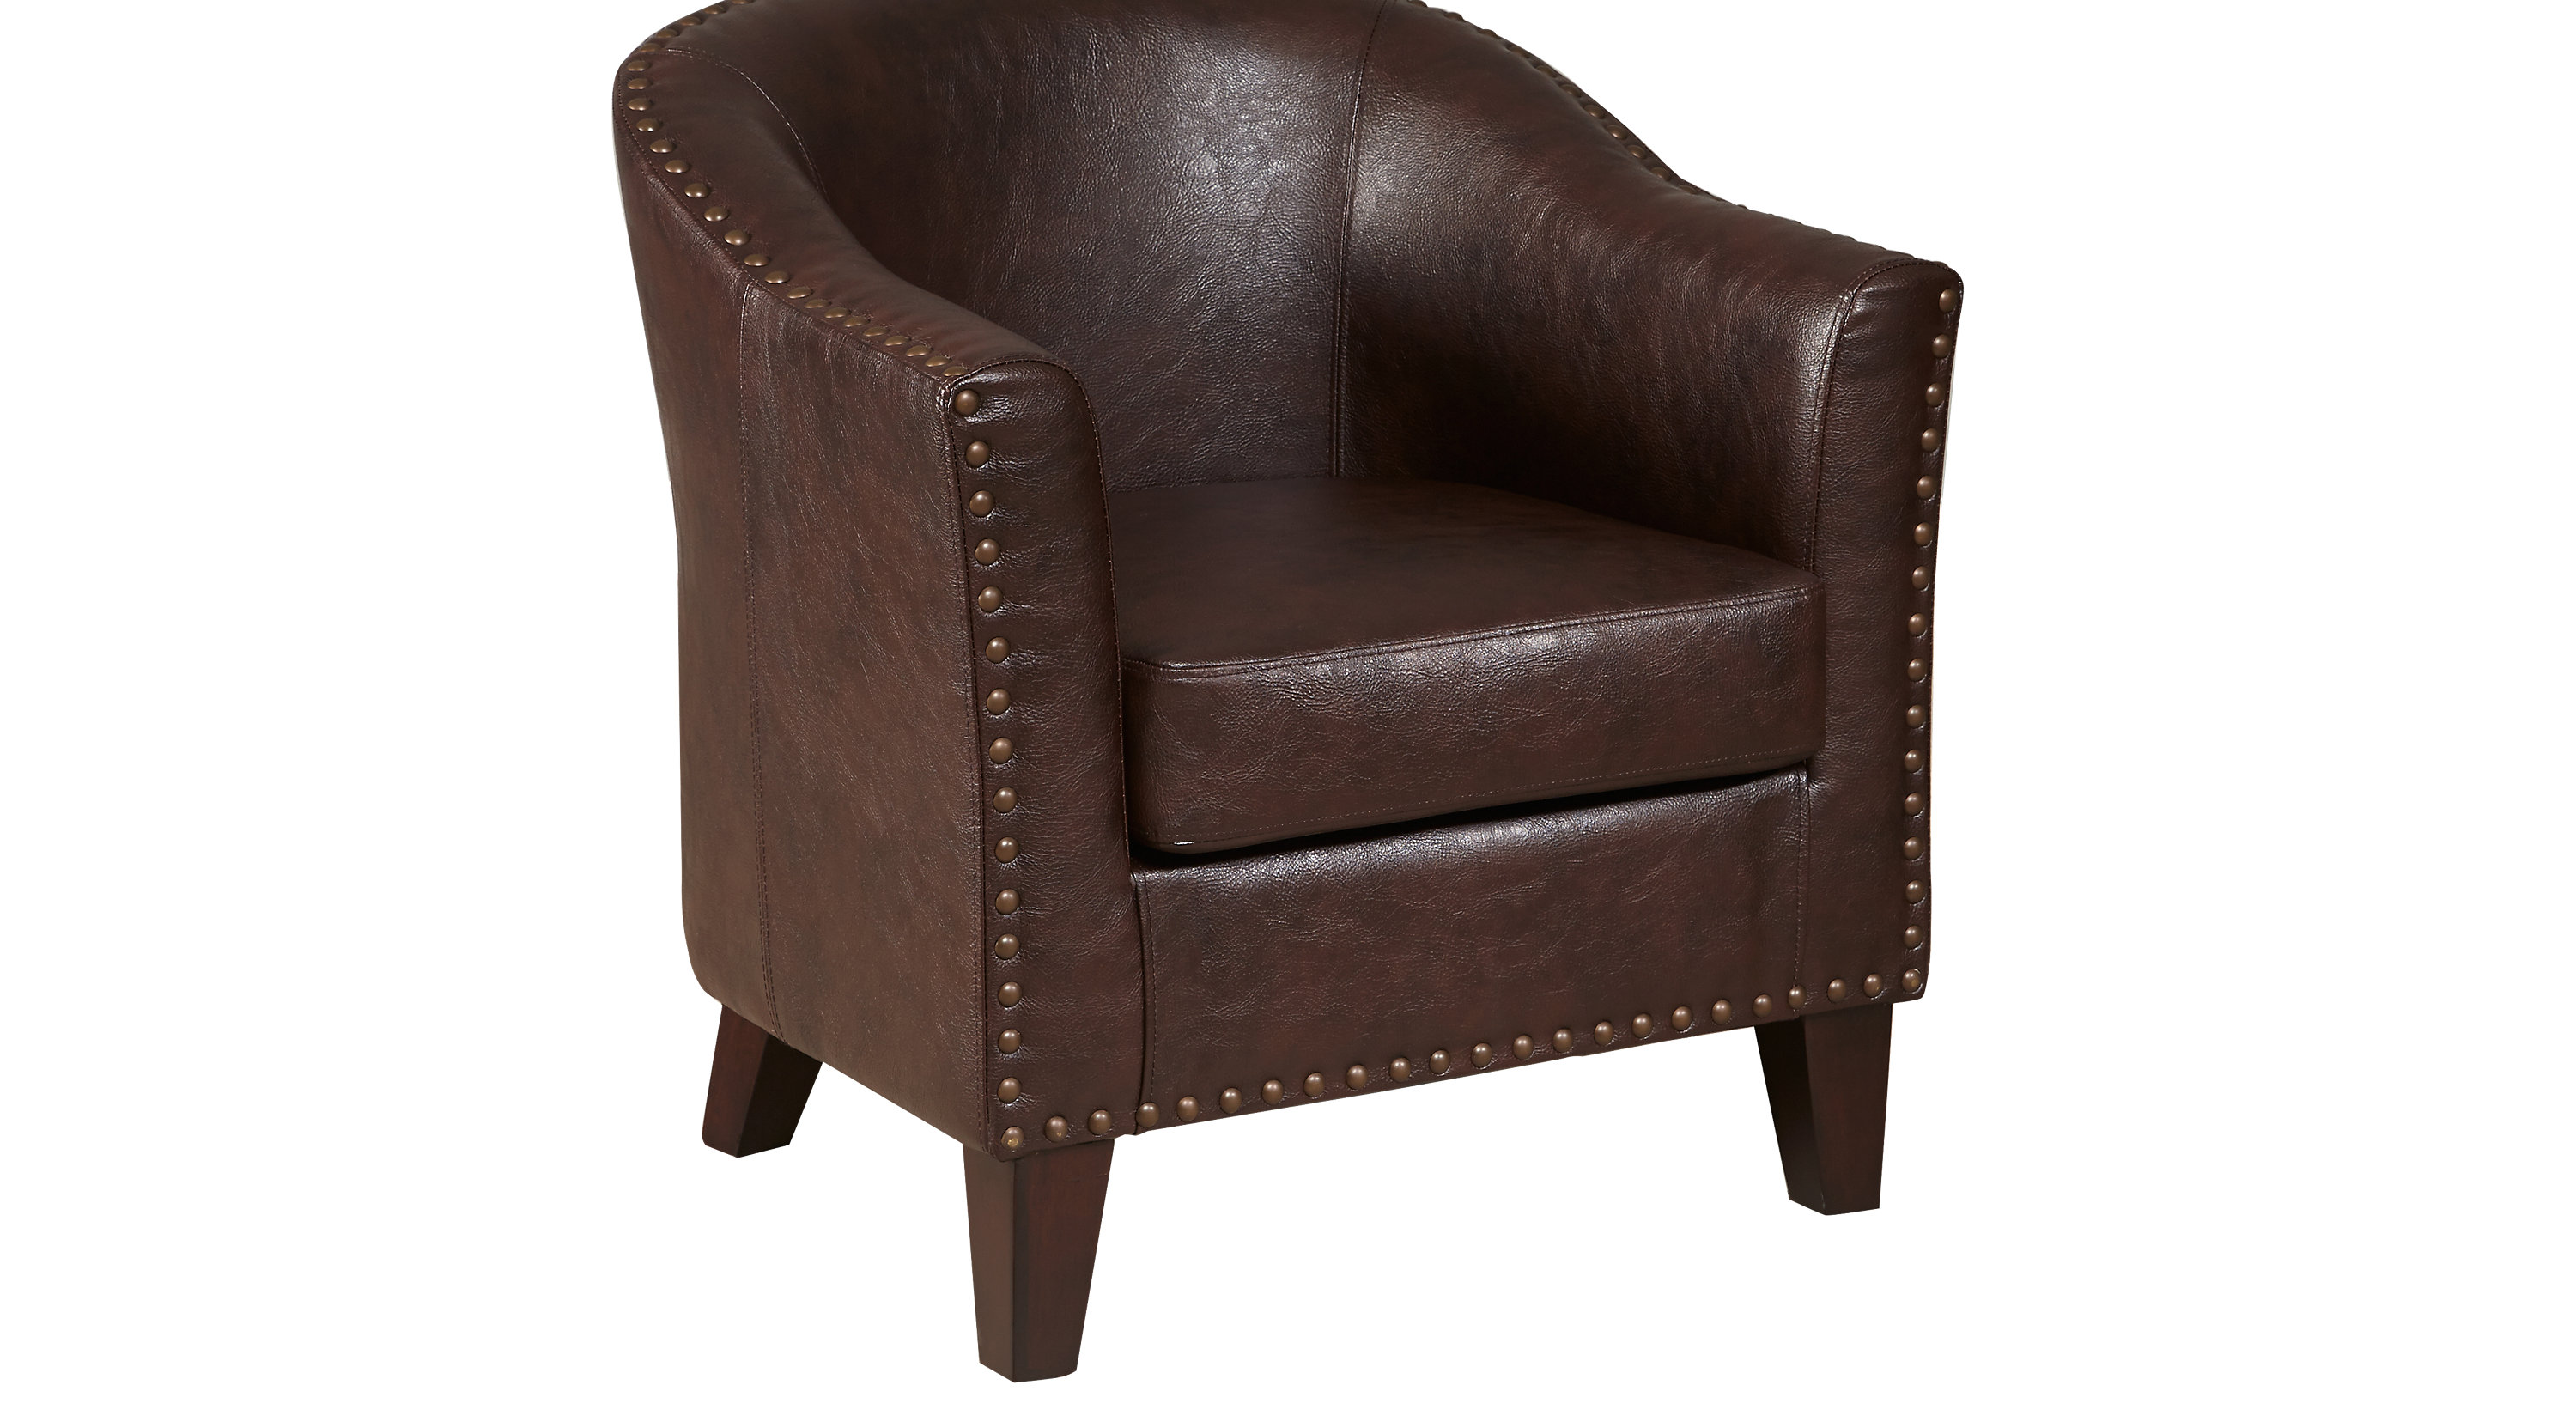 $218.00 - Jacoby Brown Accent Chair - Traditional